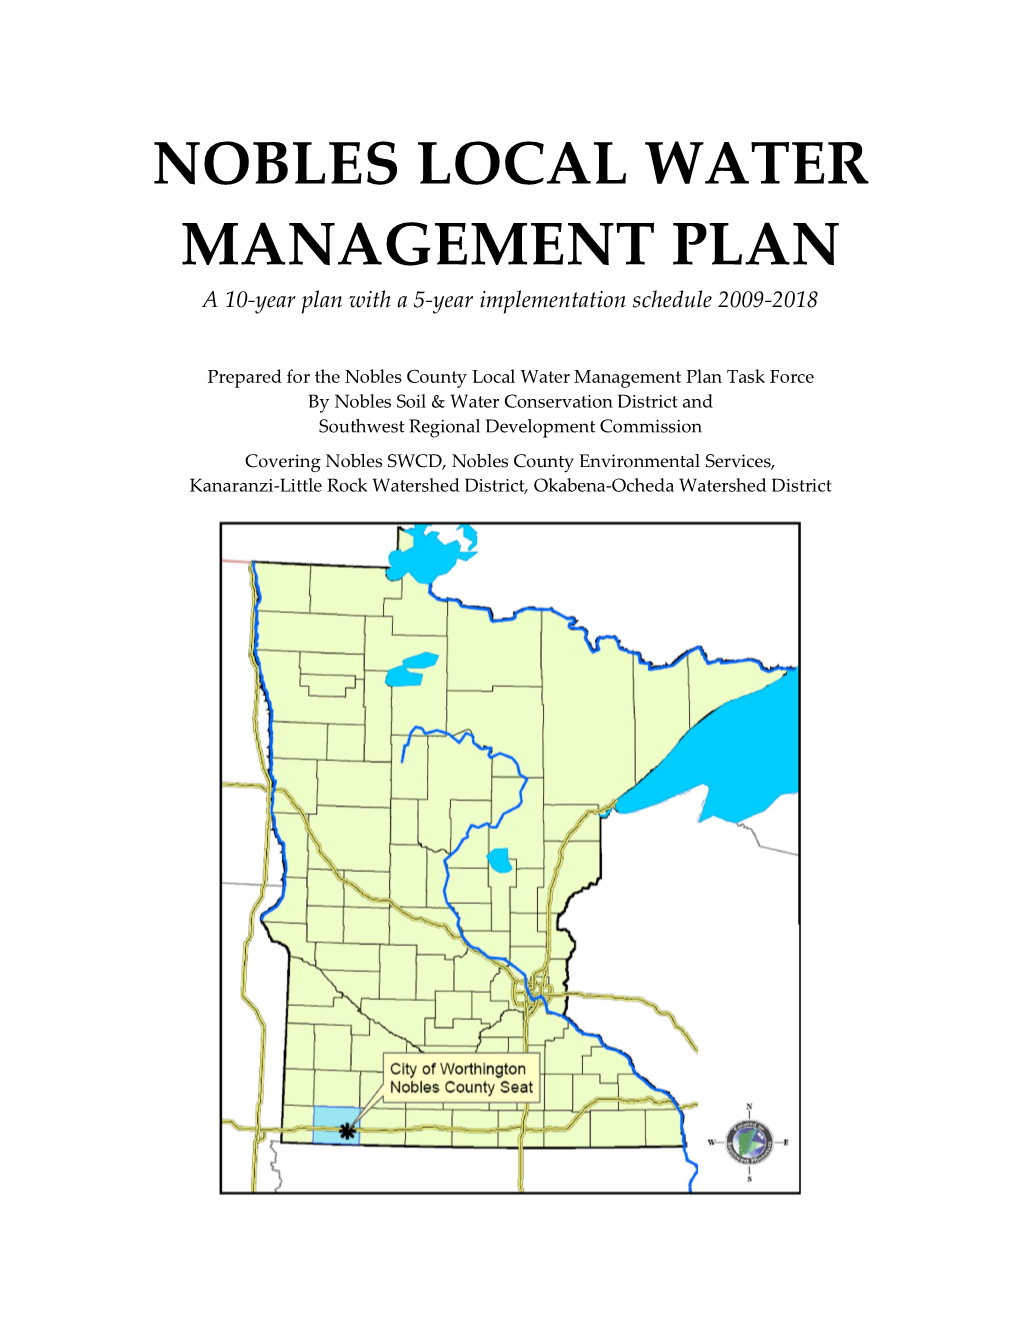 NOBLES LOCAL WATER MANAGEMENT PLAN a 10-Year Plan with a 5-Year Implementation Schedule 2009-2018